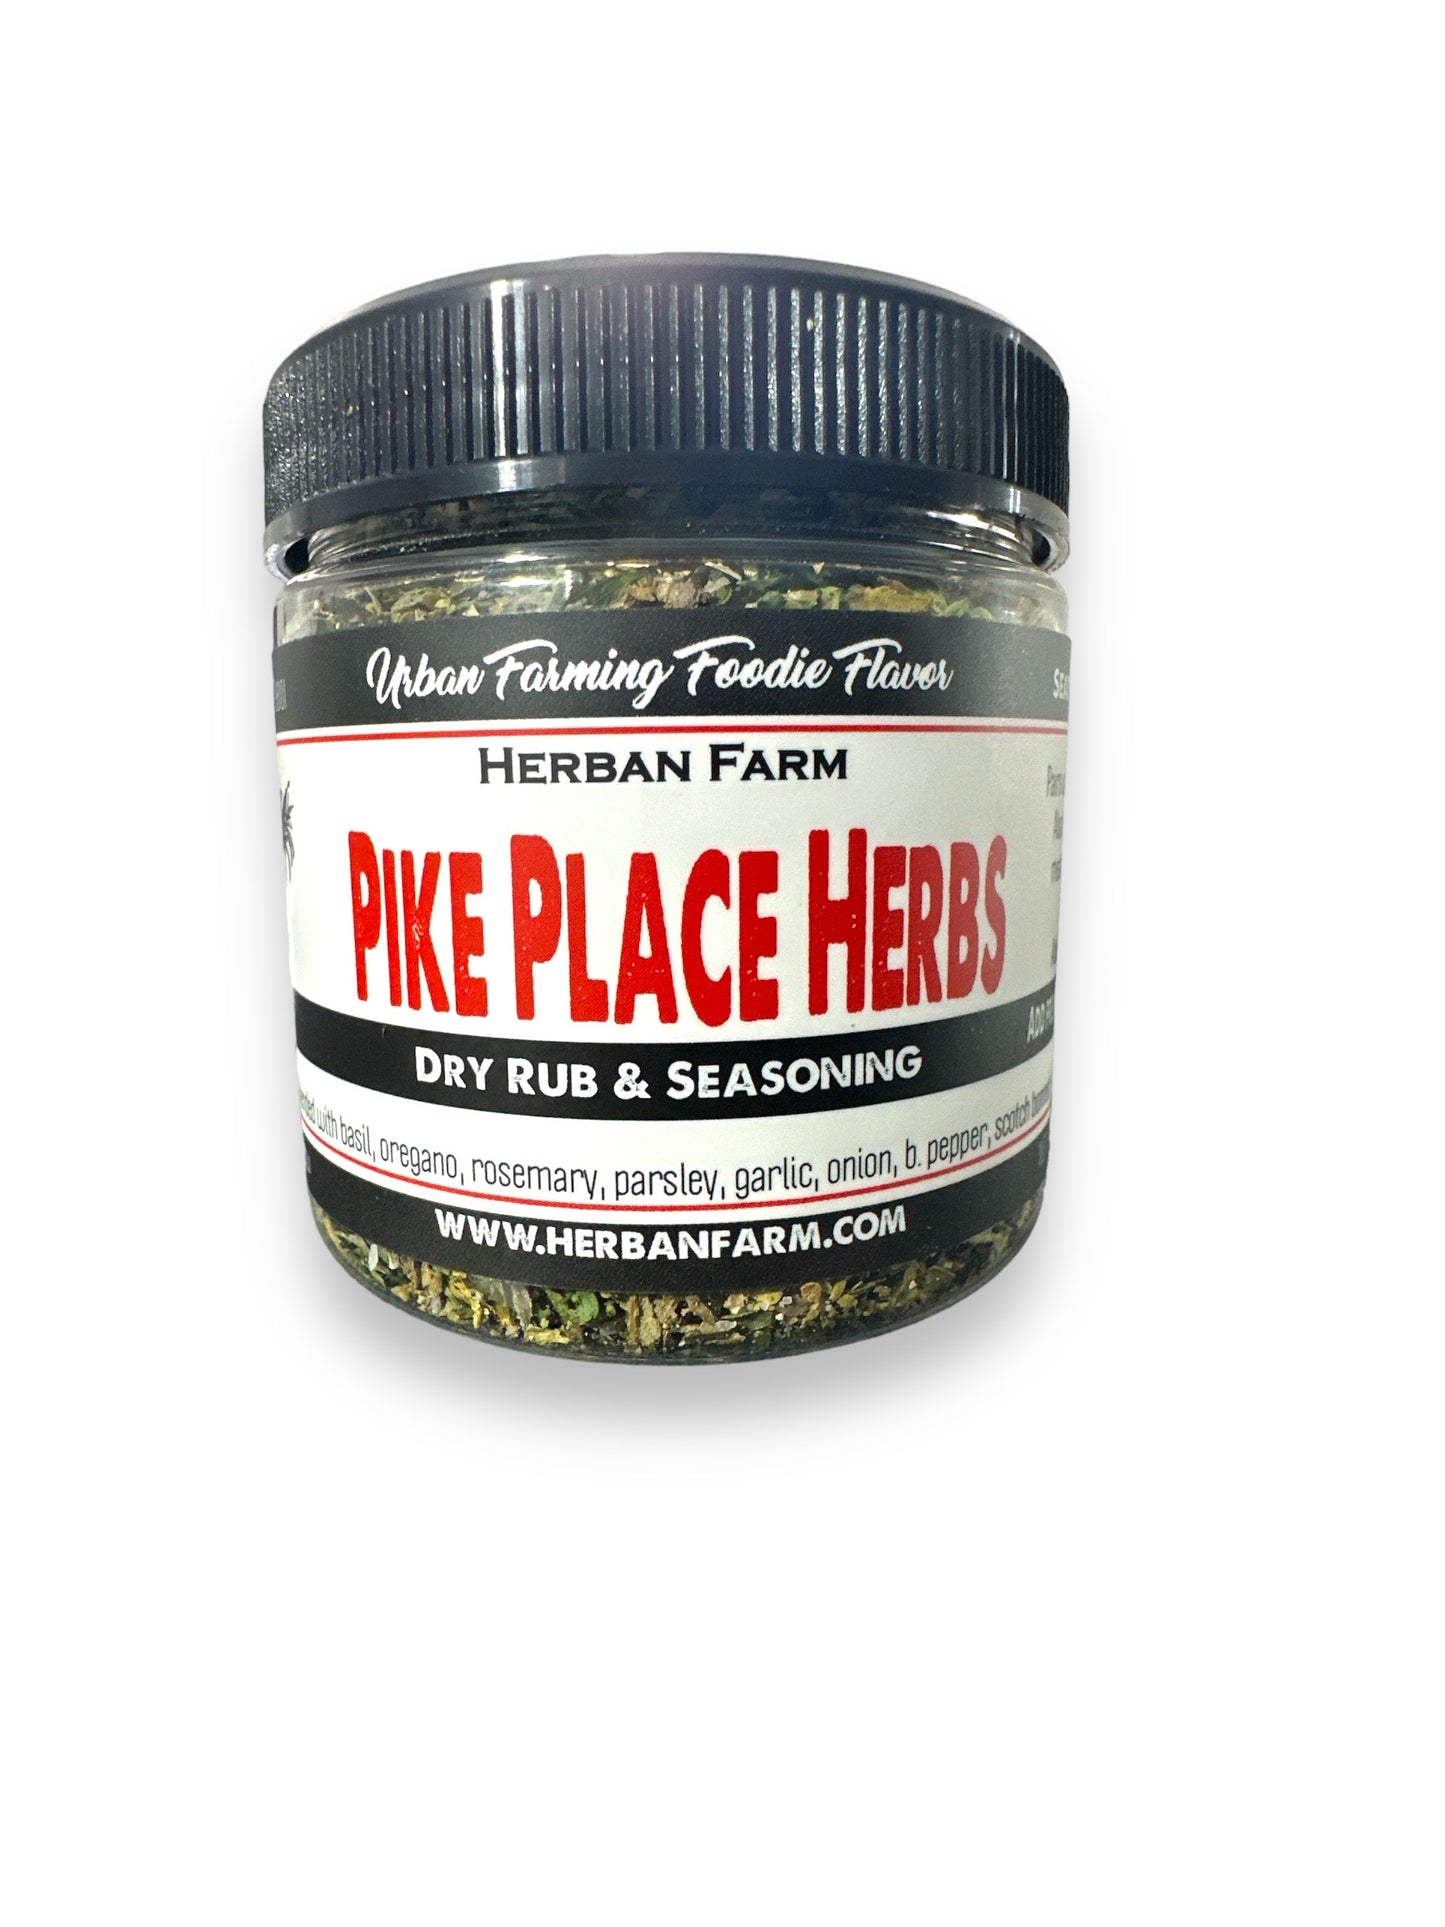 Pike Place Herbs